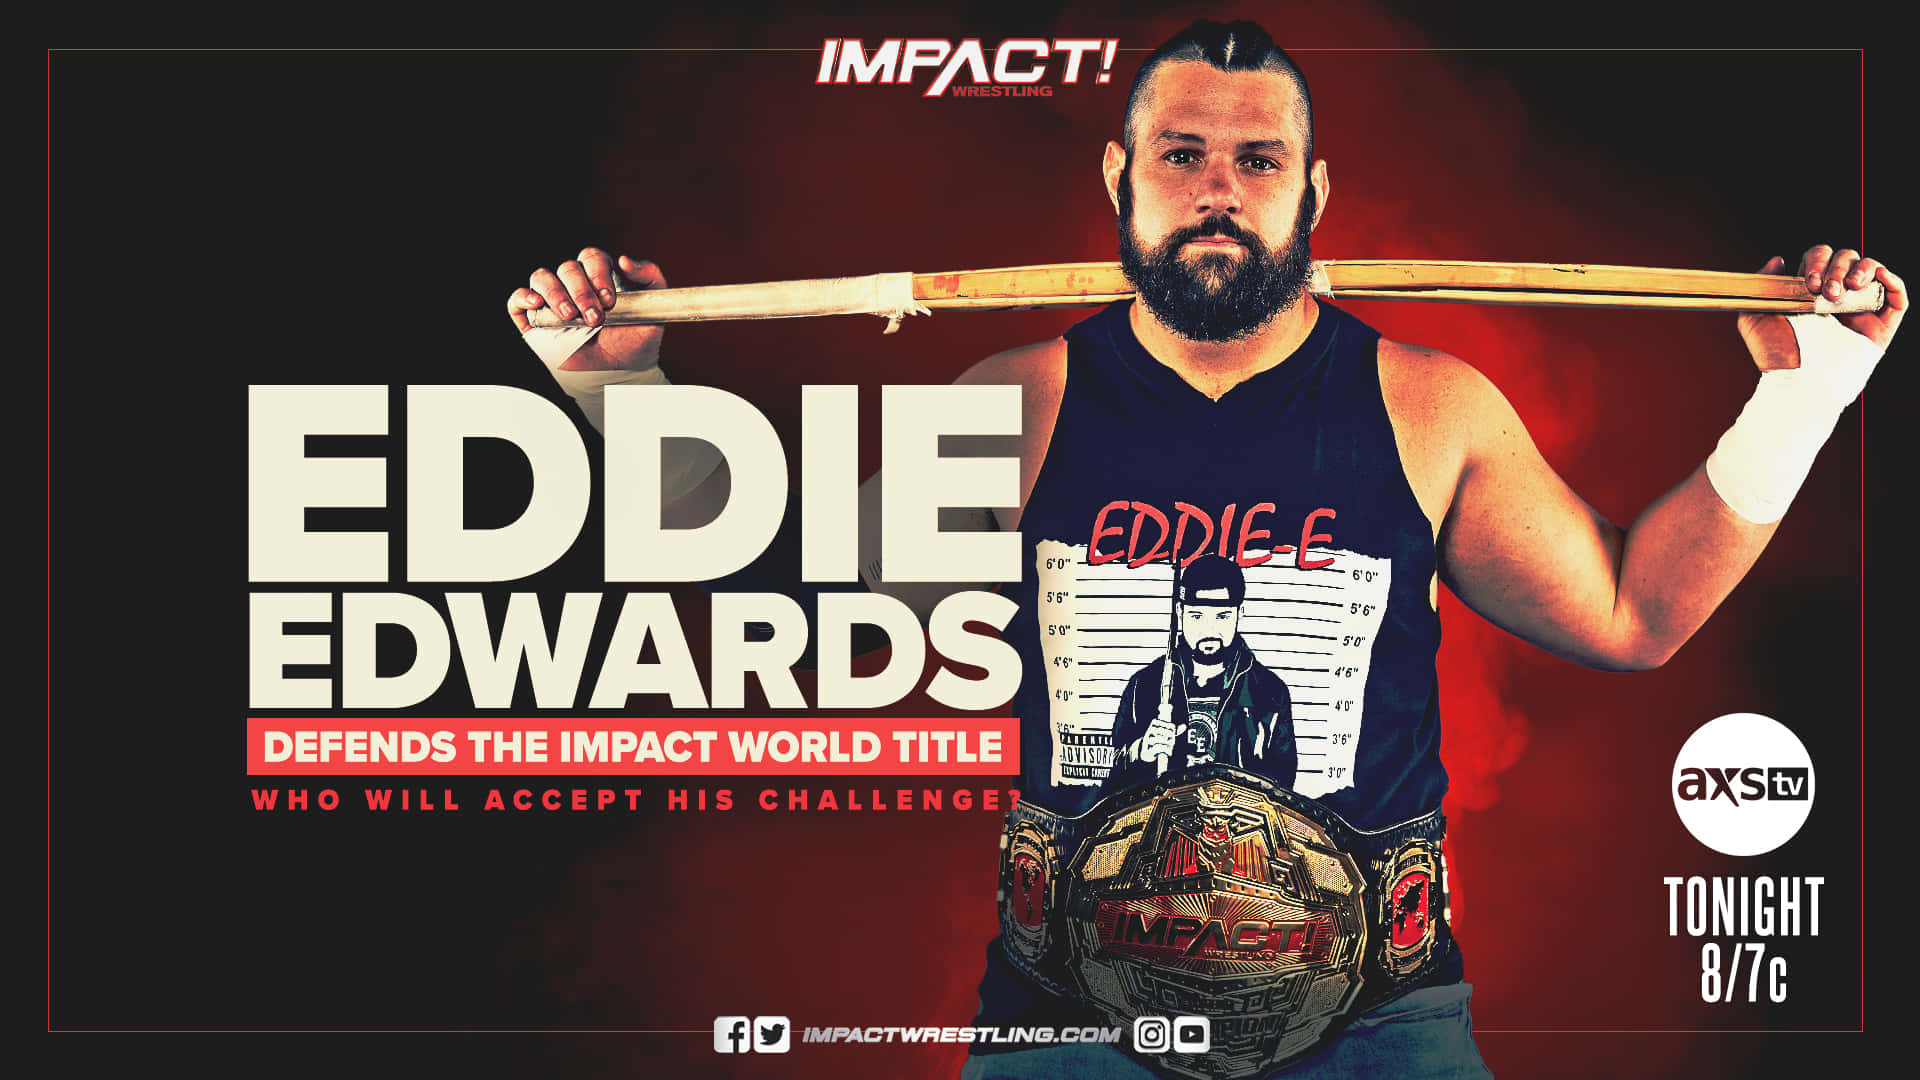 Eddieedwards Impact Posters Design Would Be Translated To 